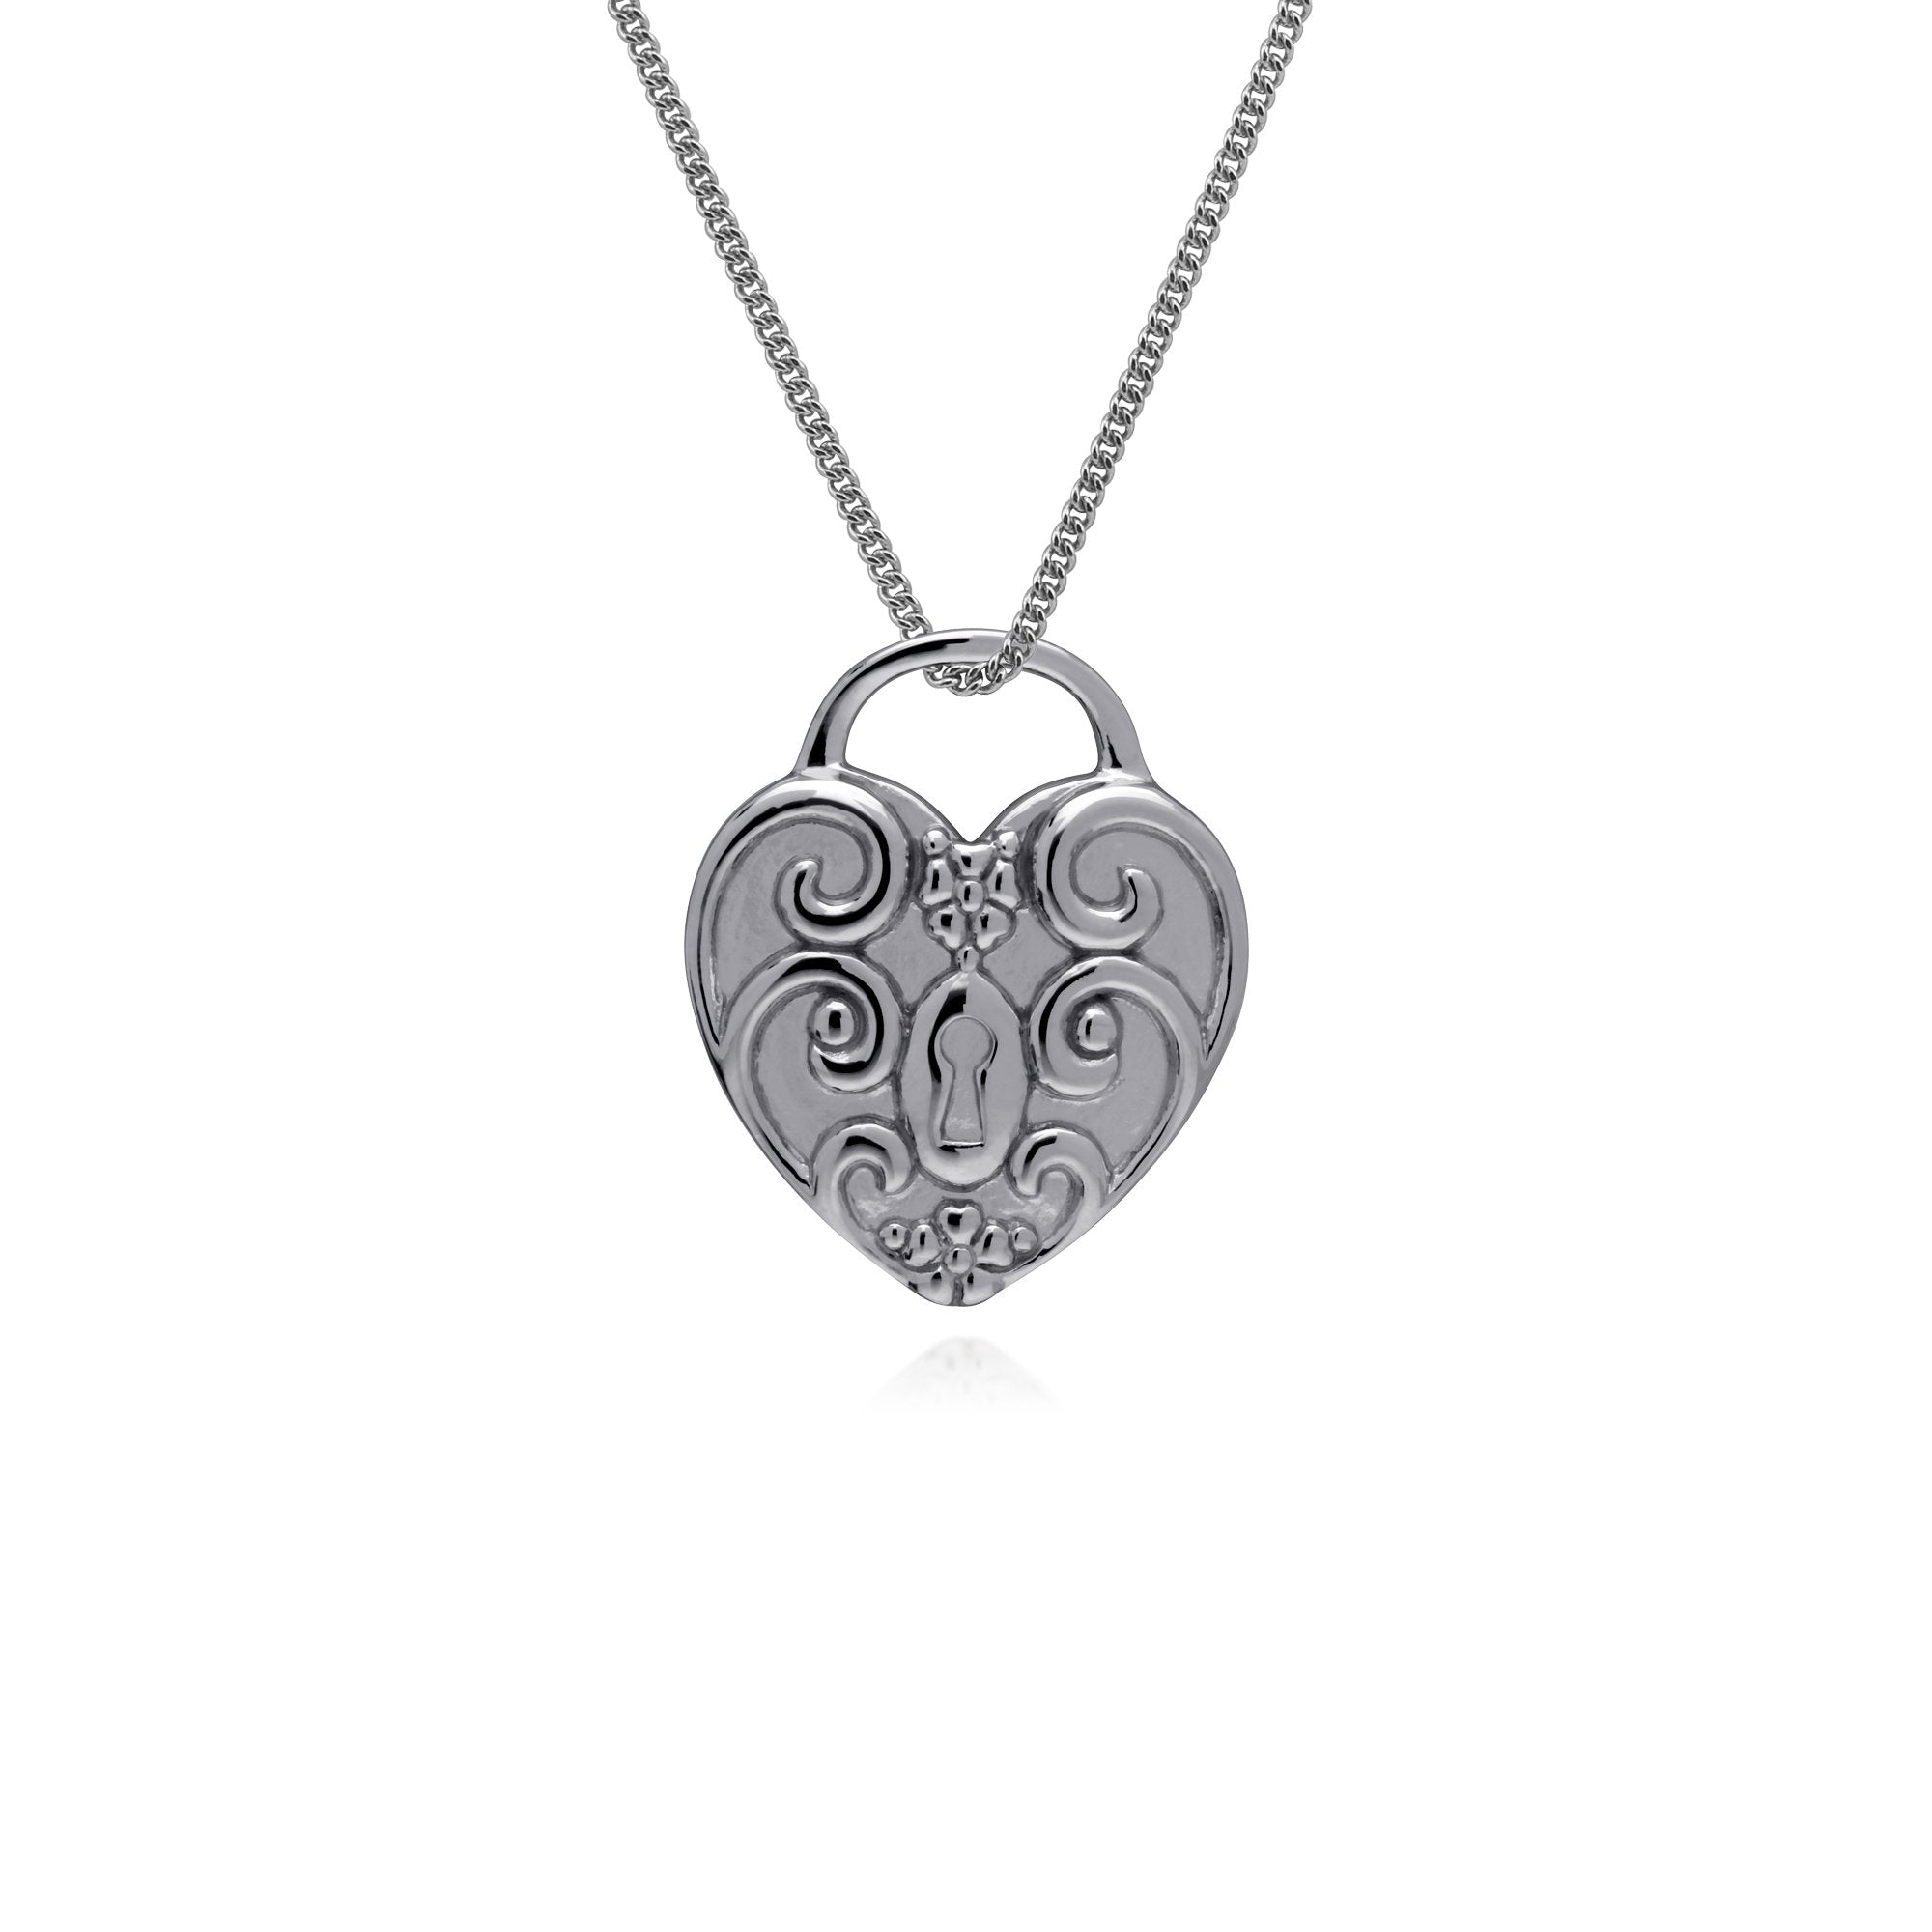 Classic Silver Swirled Heart Padlock Charm Pendant in 925 Sterling Silver